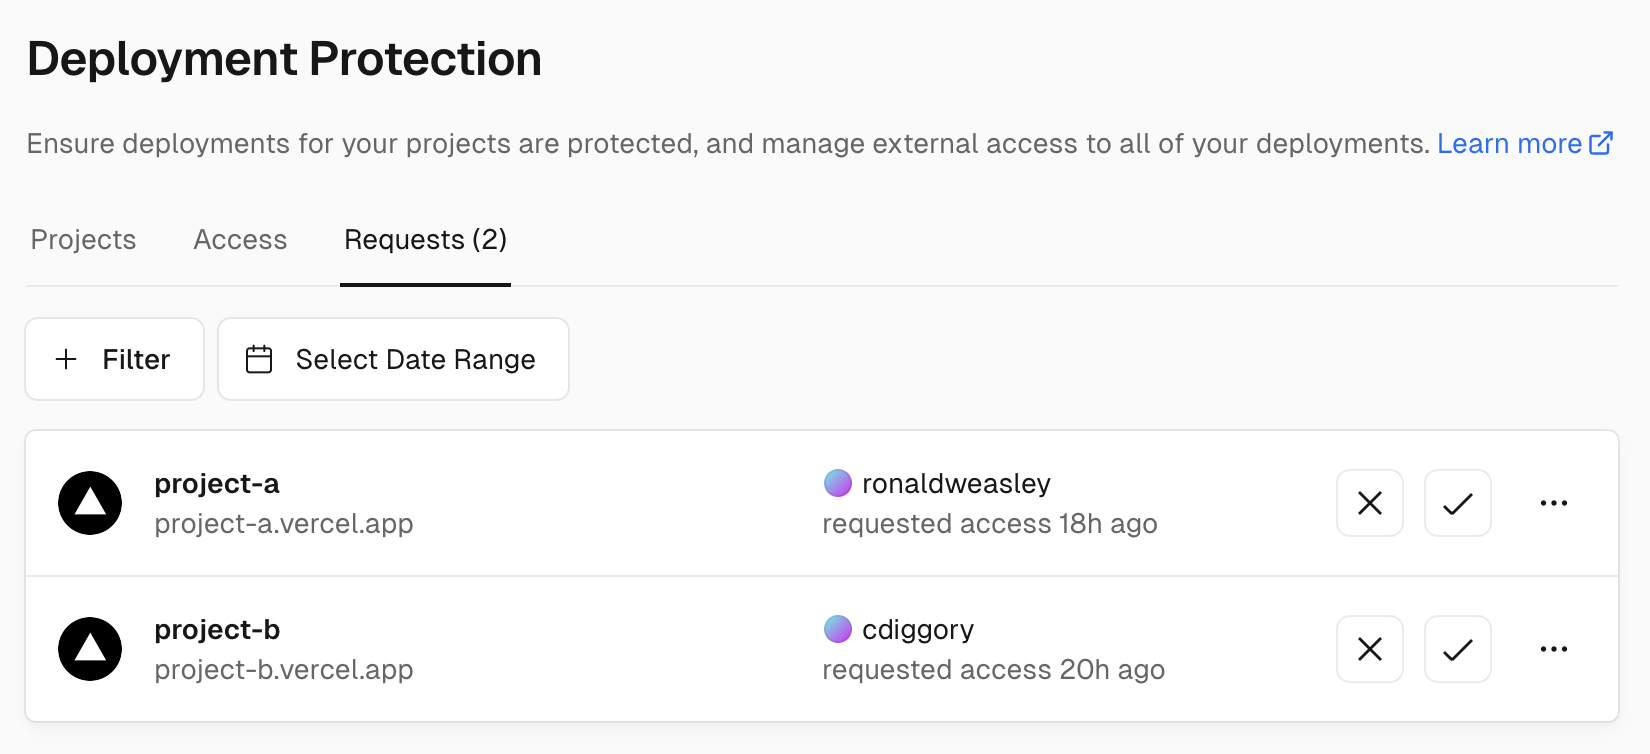 Access requests can be approved and declined on the Dashboard > Settings > Deployment Protection > Requests section.